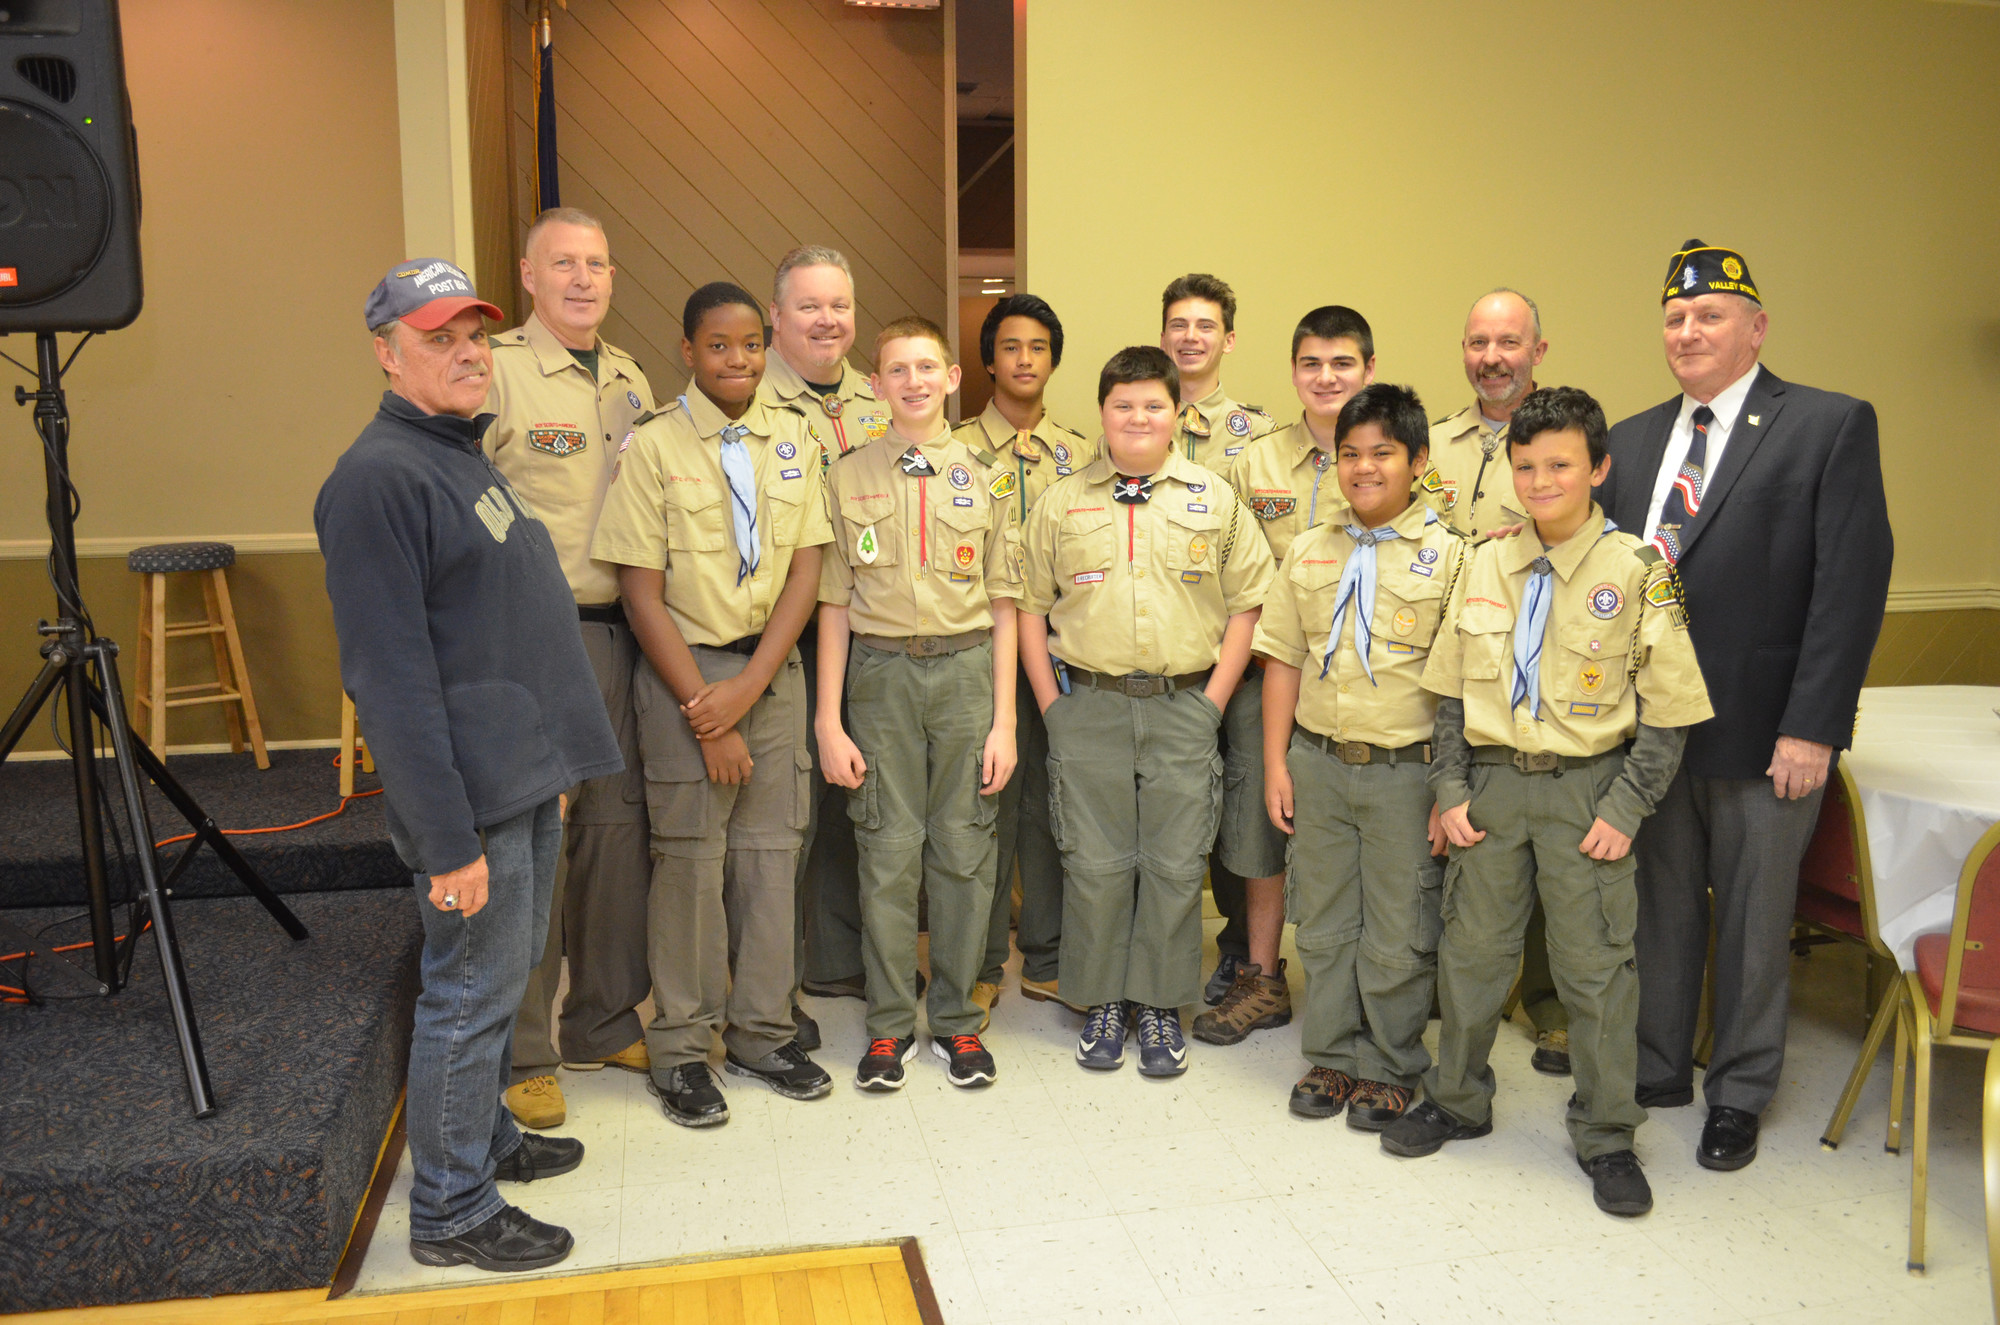 Boy Scout Troop 116 with Commander George Schuchman, Committee chair Patrick Burke, Assistant Scout Master Terry Eaton and Commander David Glaittli.